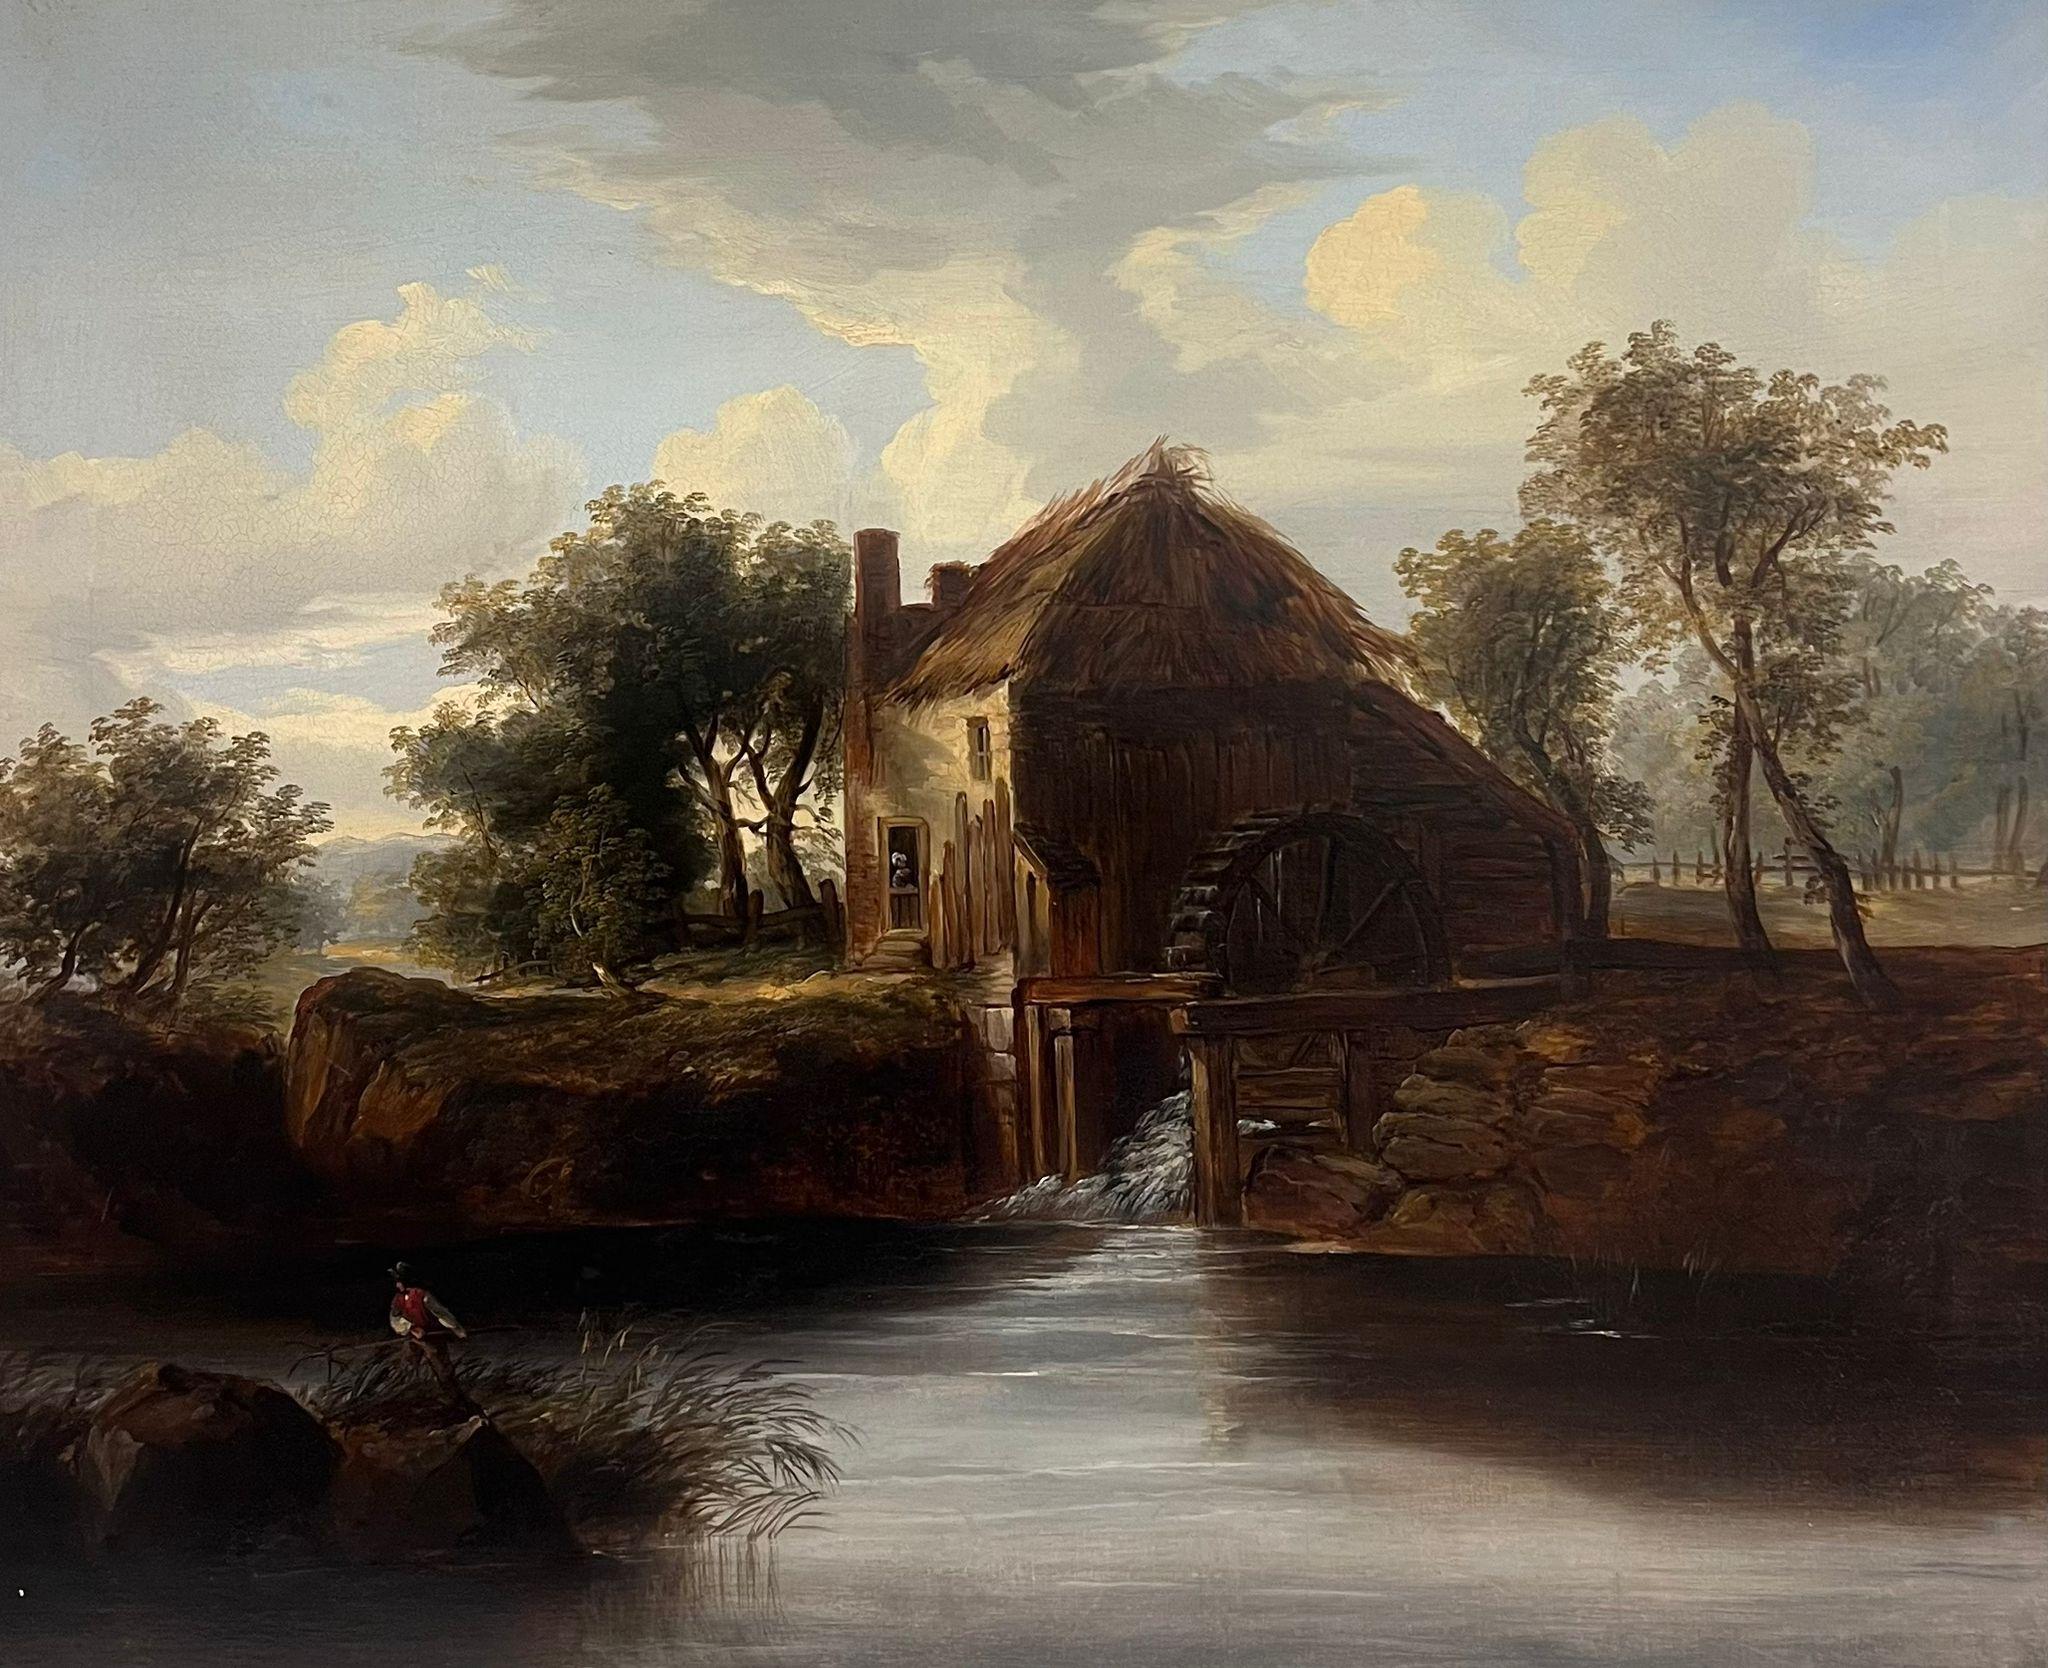 The Old Thatched Mill
attributed to Caleb Robert Stanley (British 1795-1868)
oil on canvas, framed
framed: 30 x 35 inches
canvas : 25 x 30 inches
provenance: private collection, England
previously with Cider House Galleries, Surrey (see label